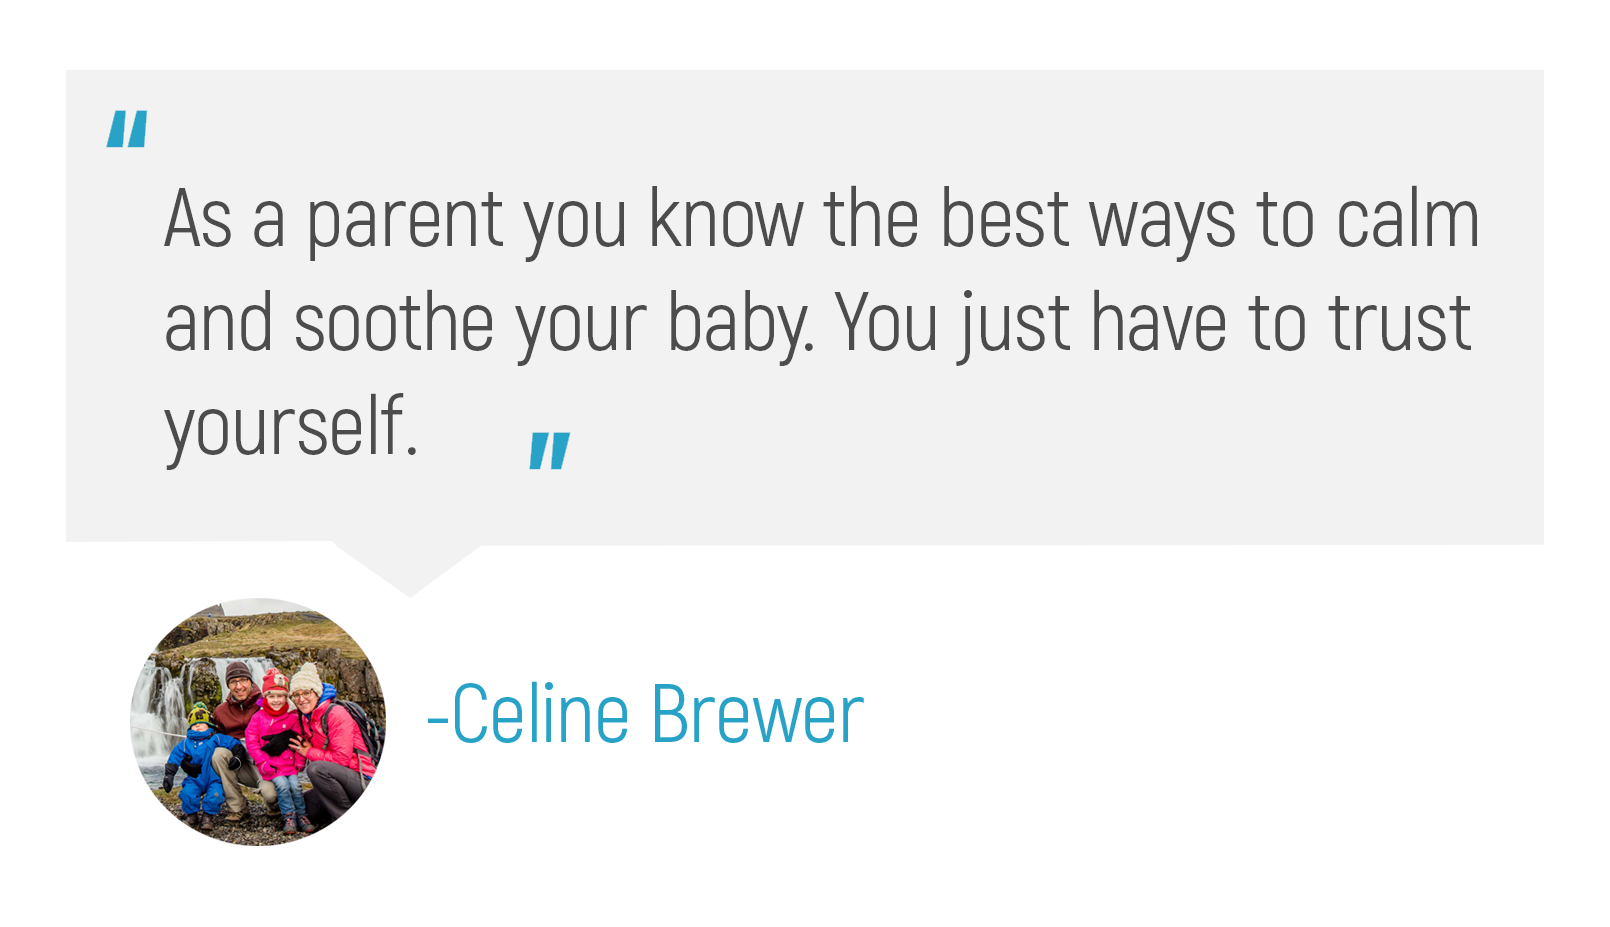 "As a parent you know the best ways to calm and soothe your baby. You just have to trust yourself."